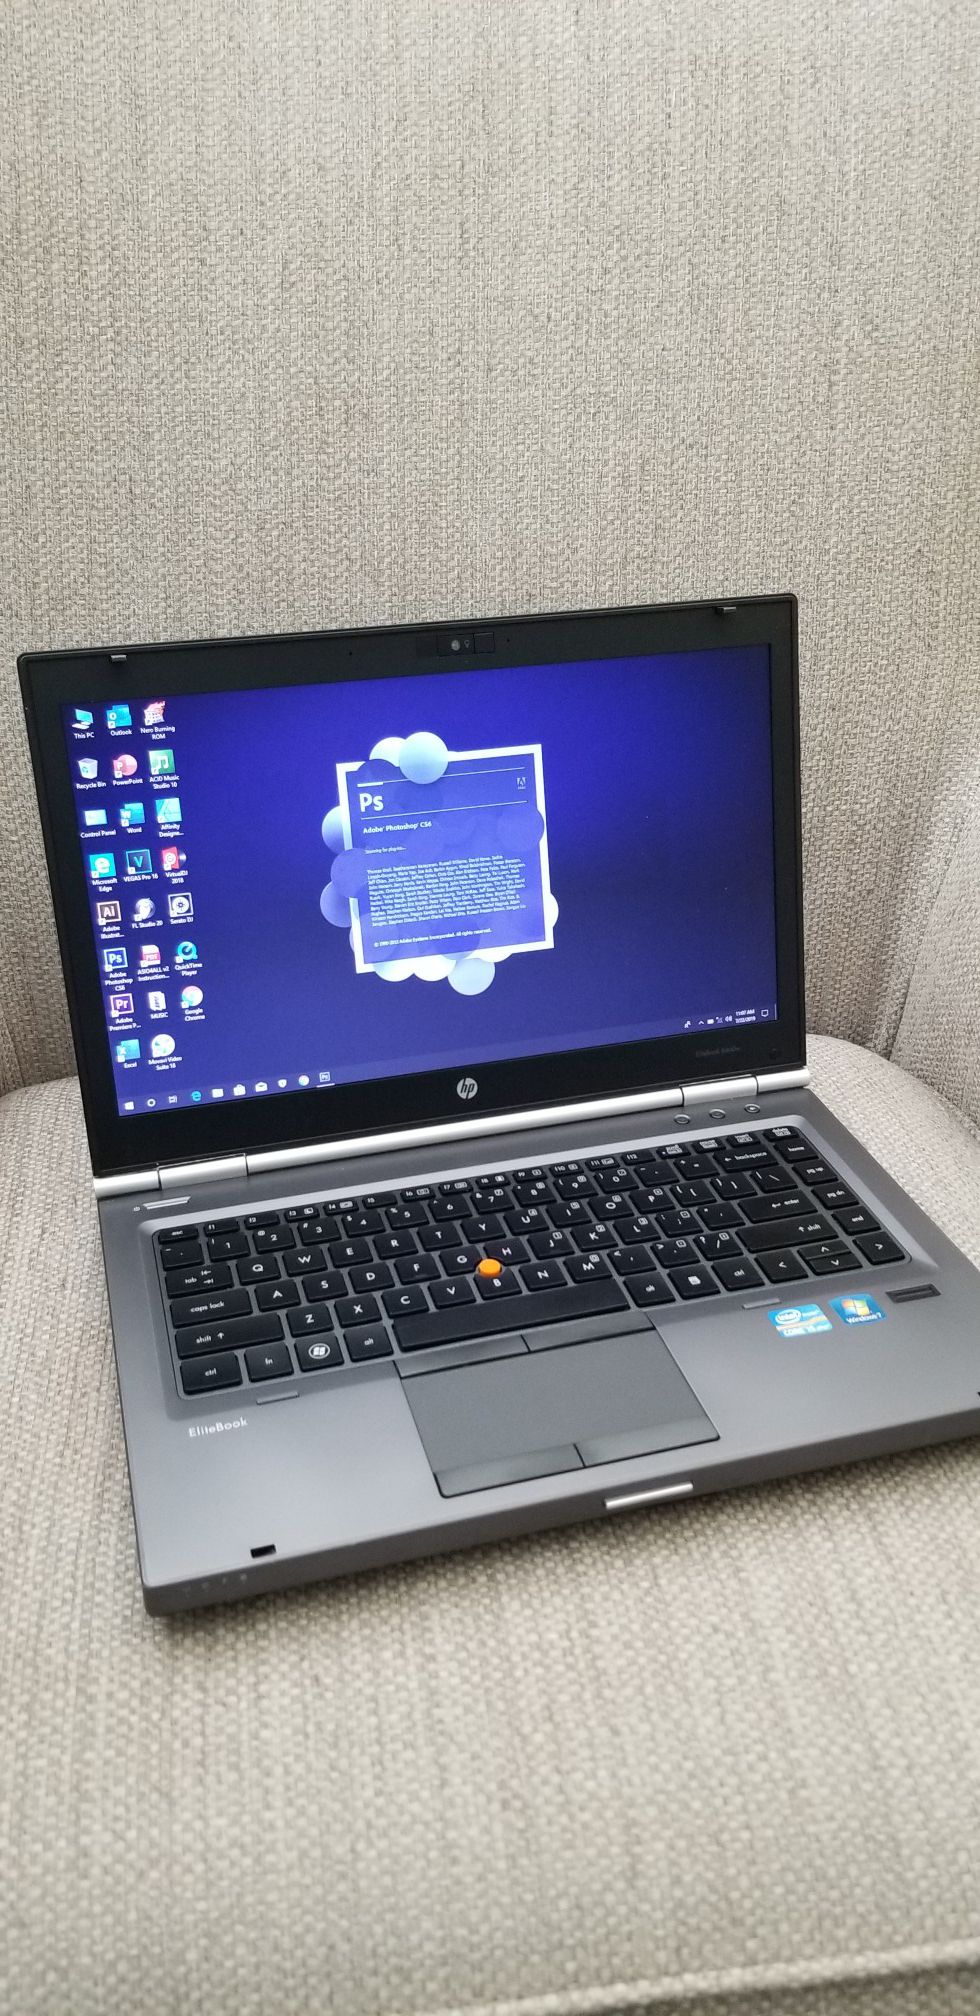 Hp laptop i7 workstation/ windows 10 pro / great condition/ fast / lot programs full / 💽📷💻🔊🔋💽⌨